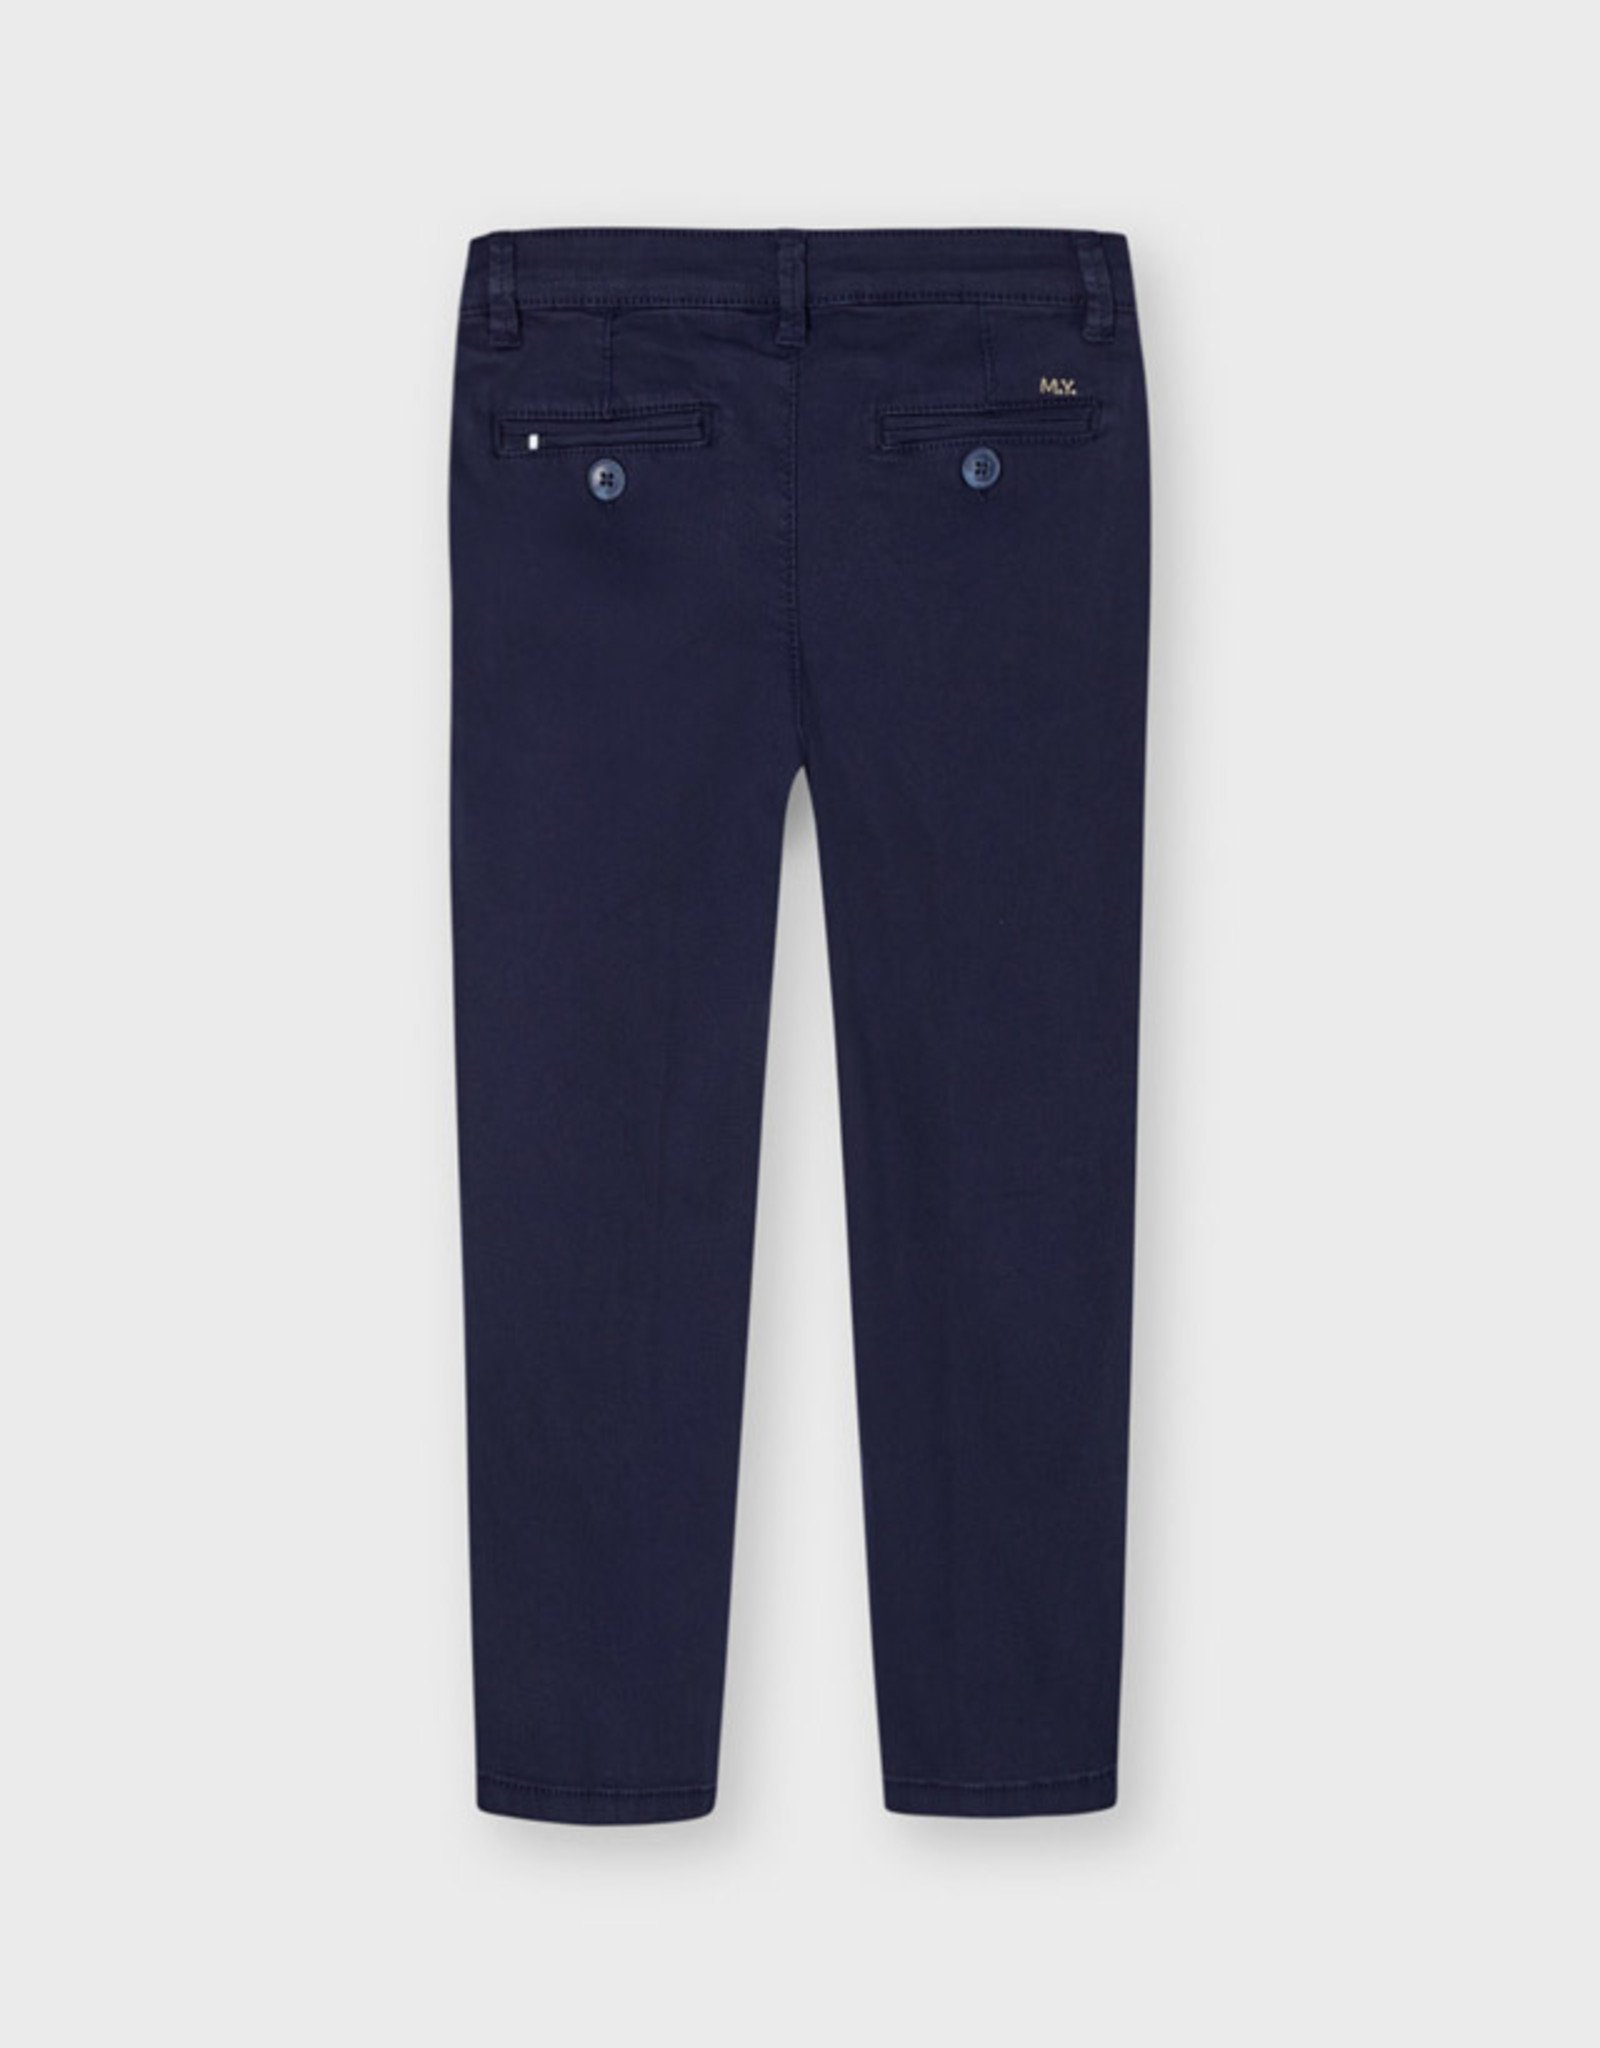 Mayoral Pique Skinny Chino Trousers